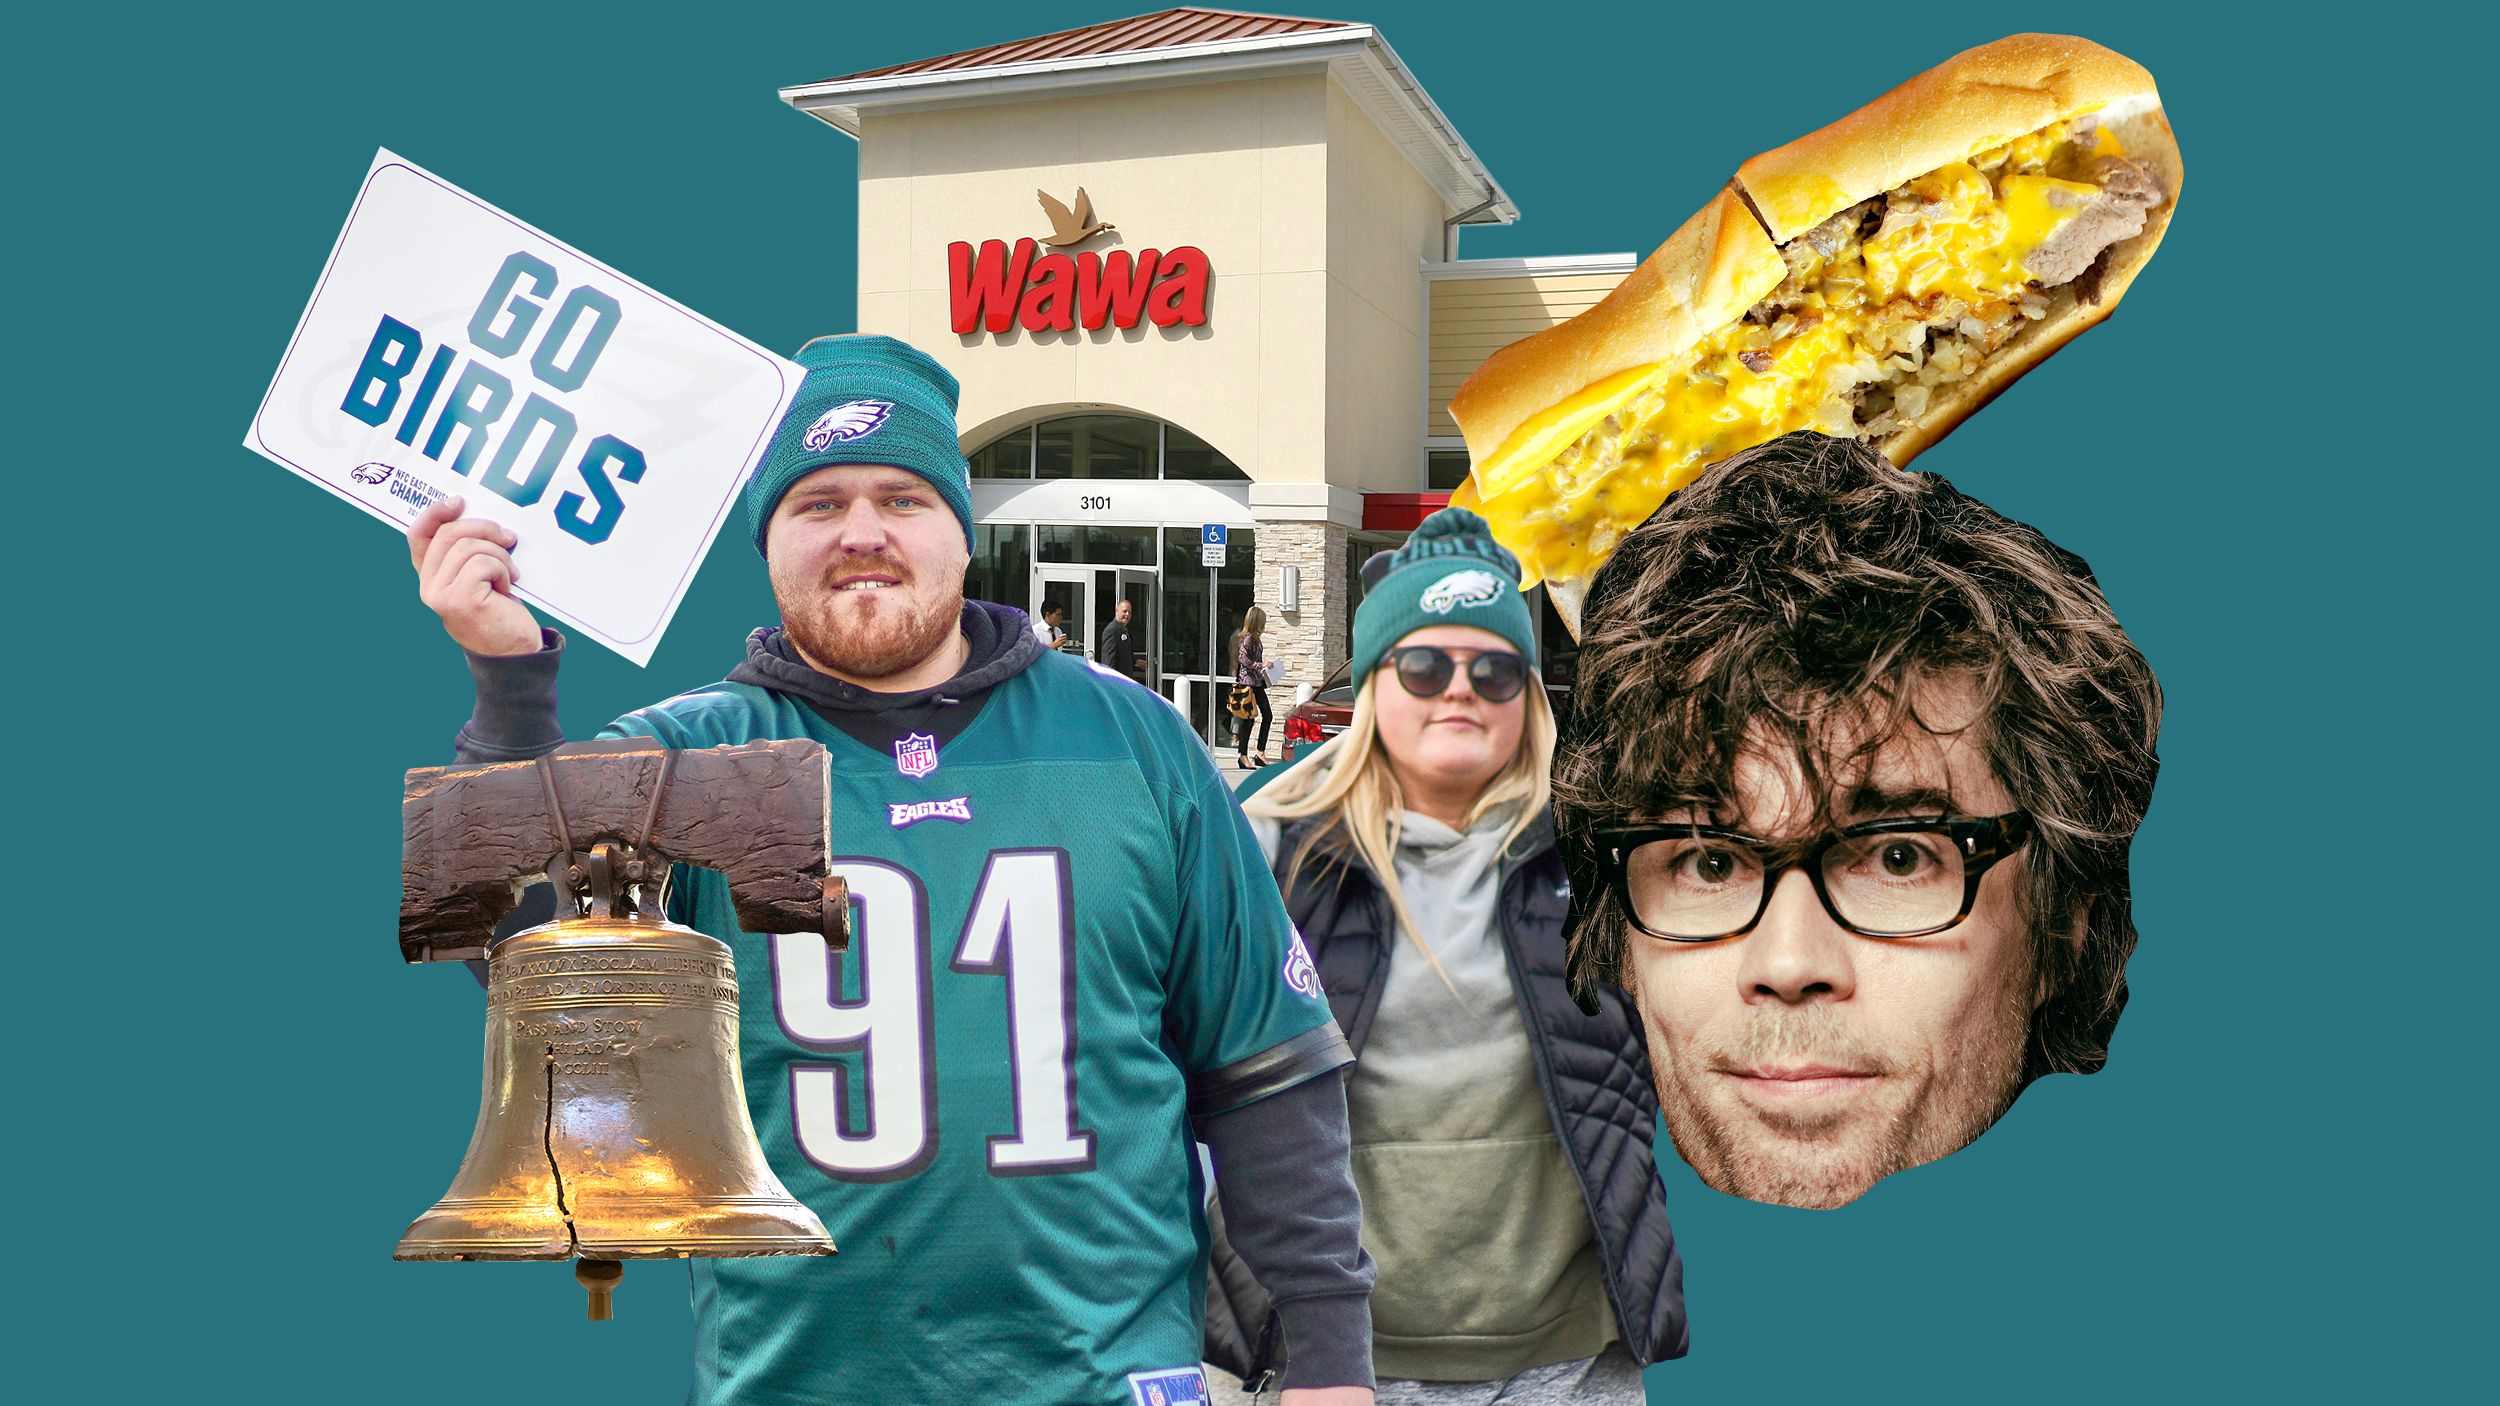 Are Philly Fans Really The Worst? : NPR